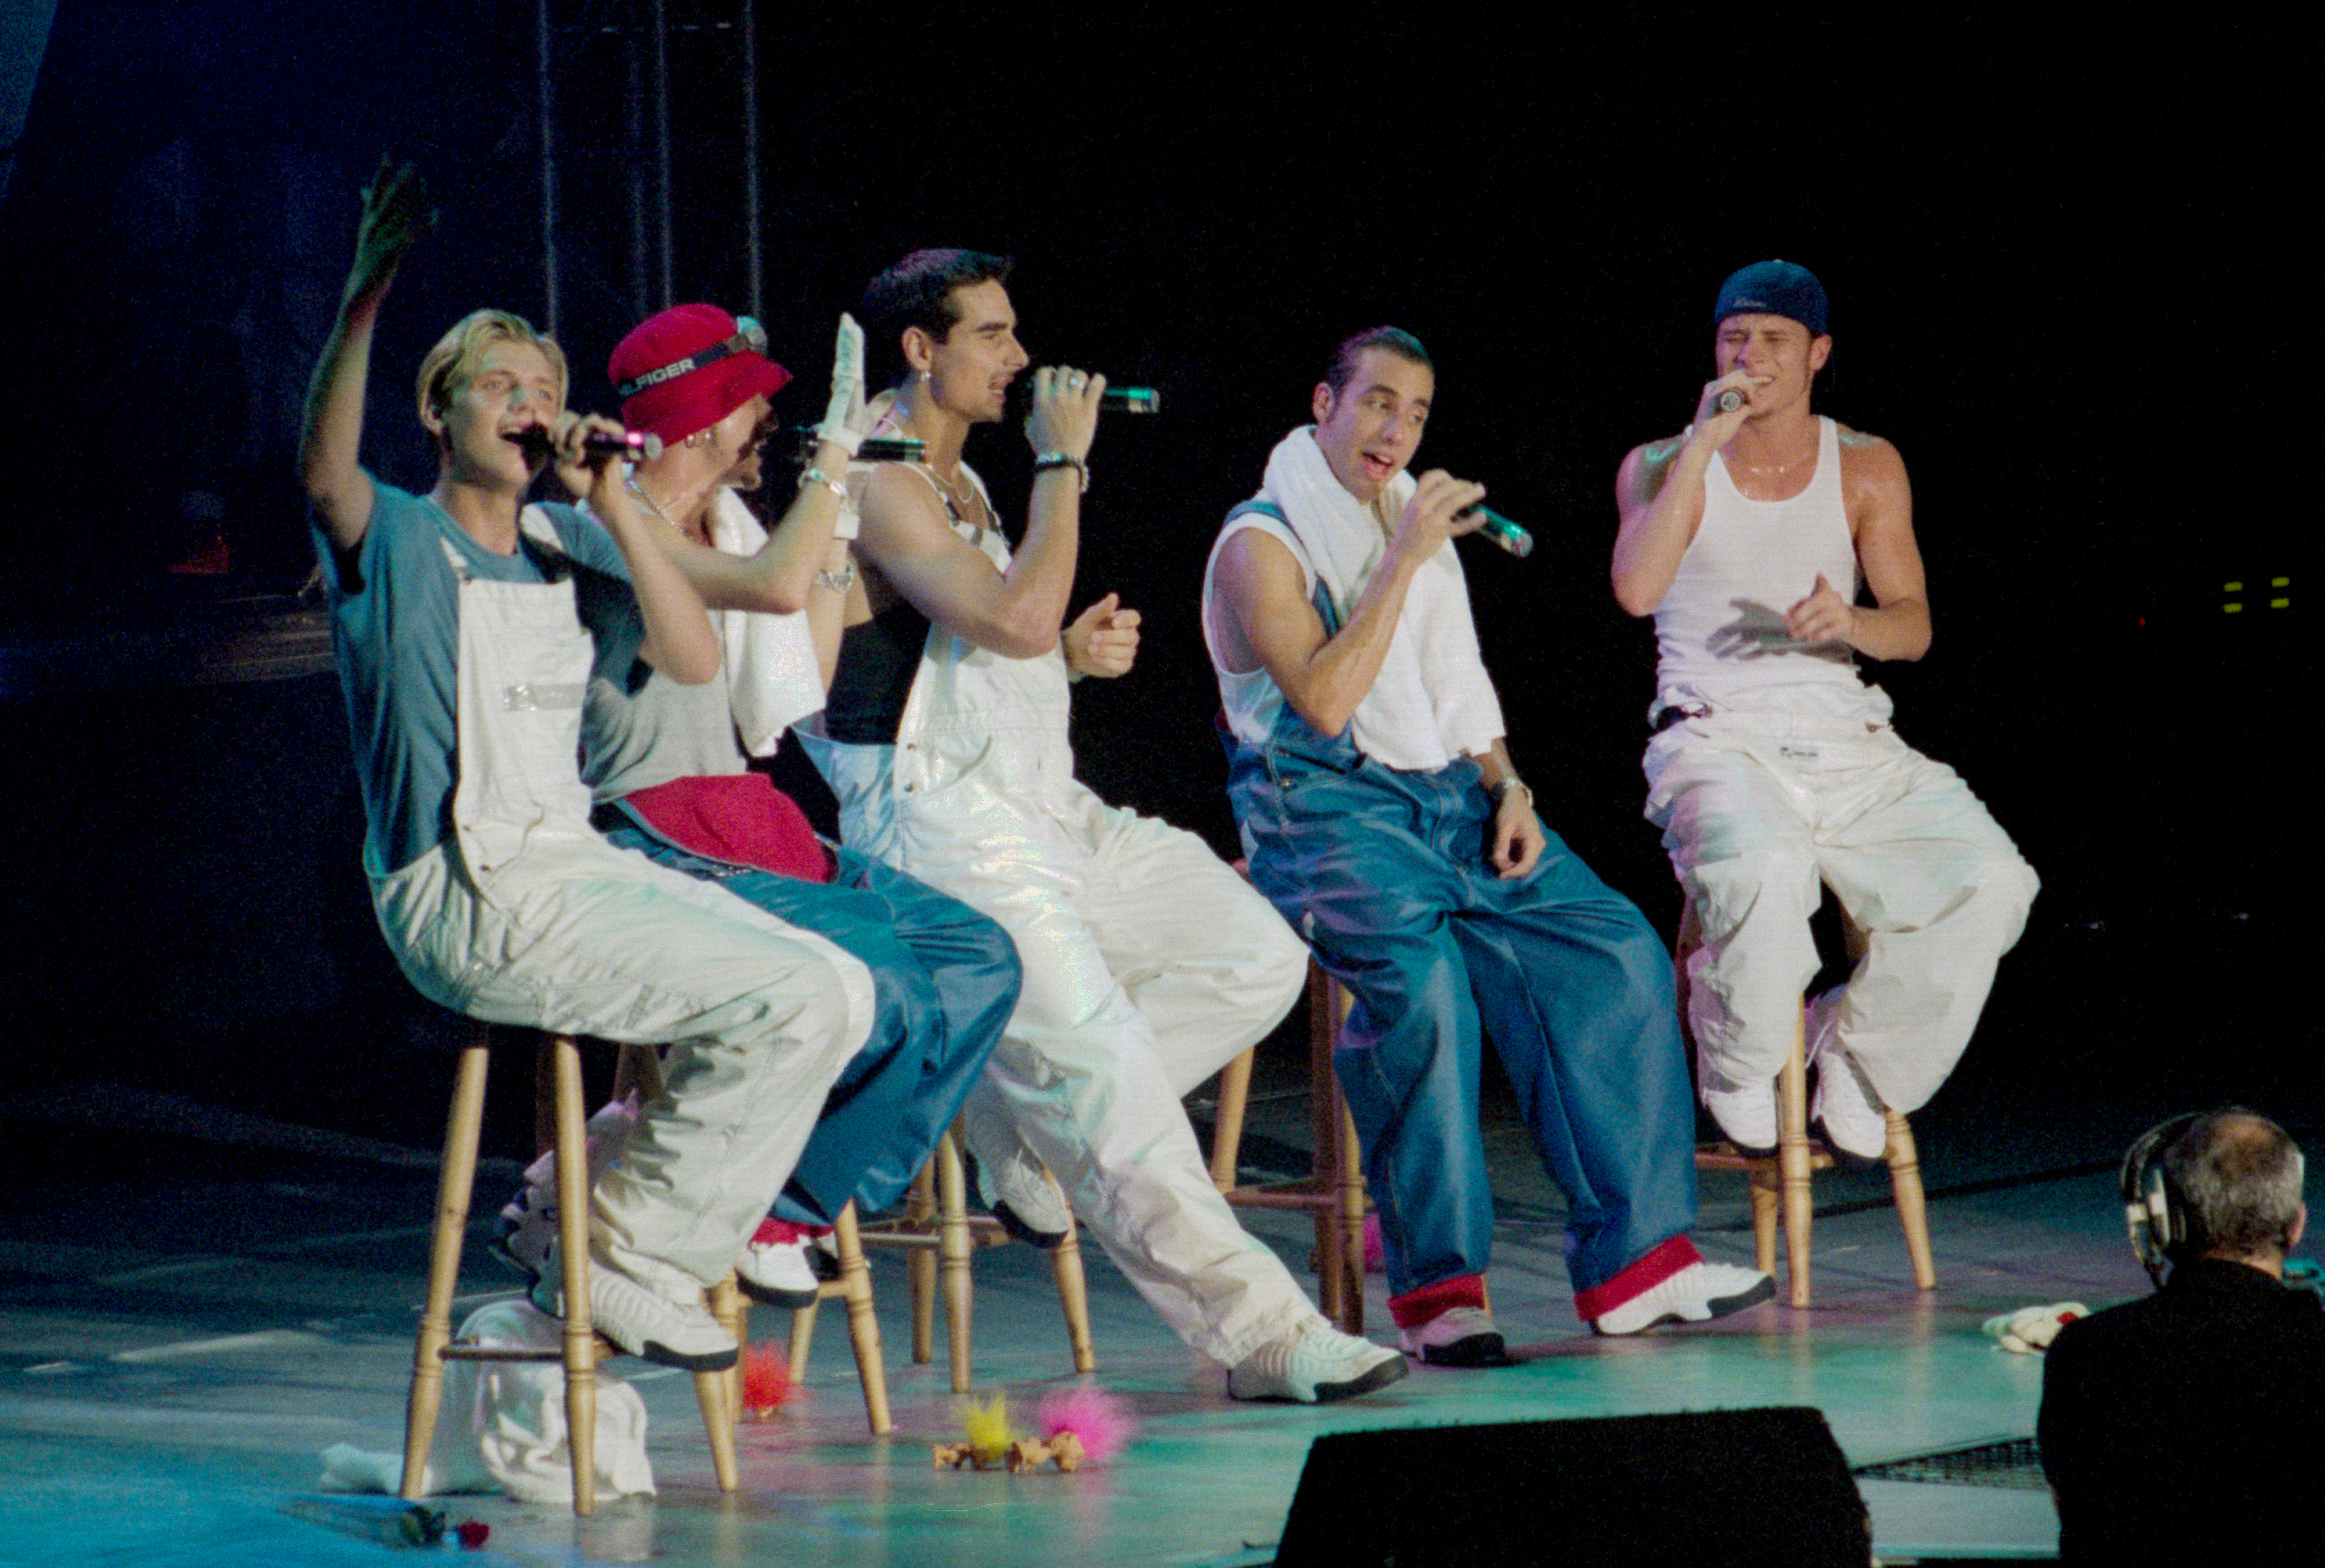 The Backstreet Boys performing in London, England in June 1997